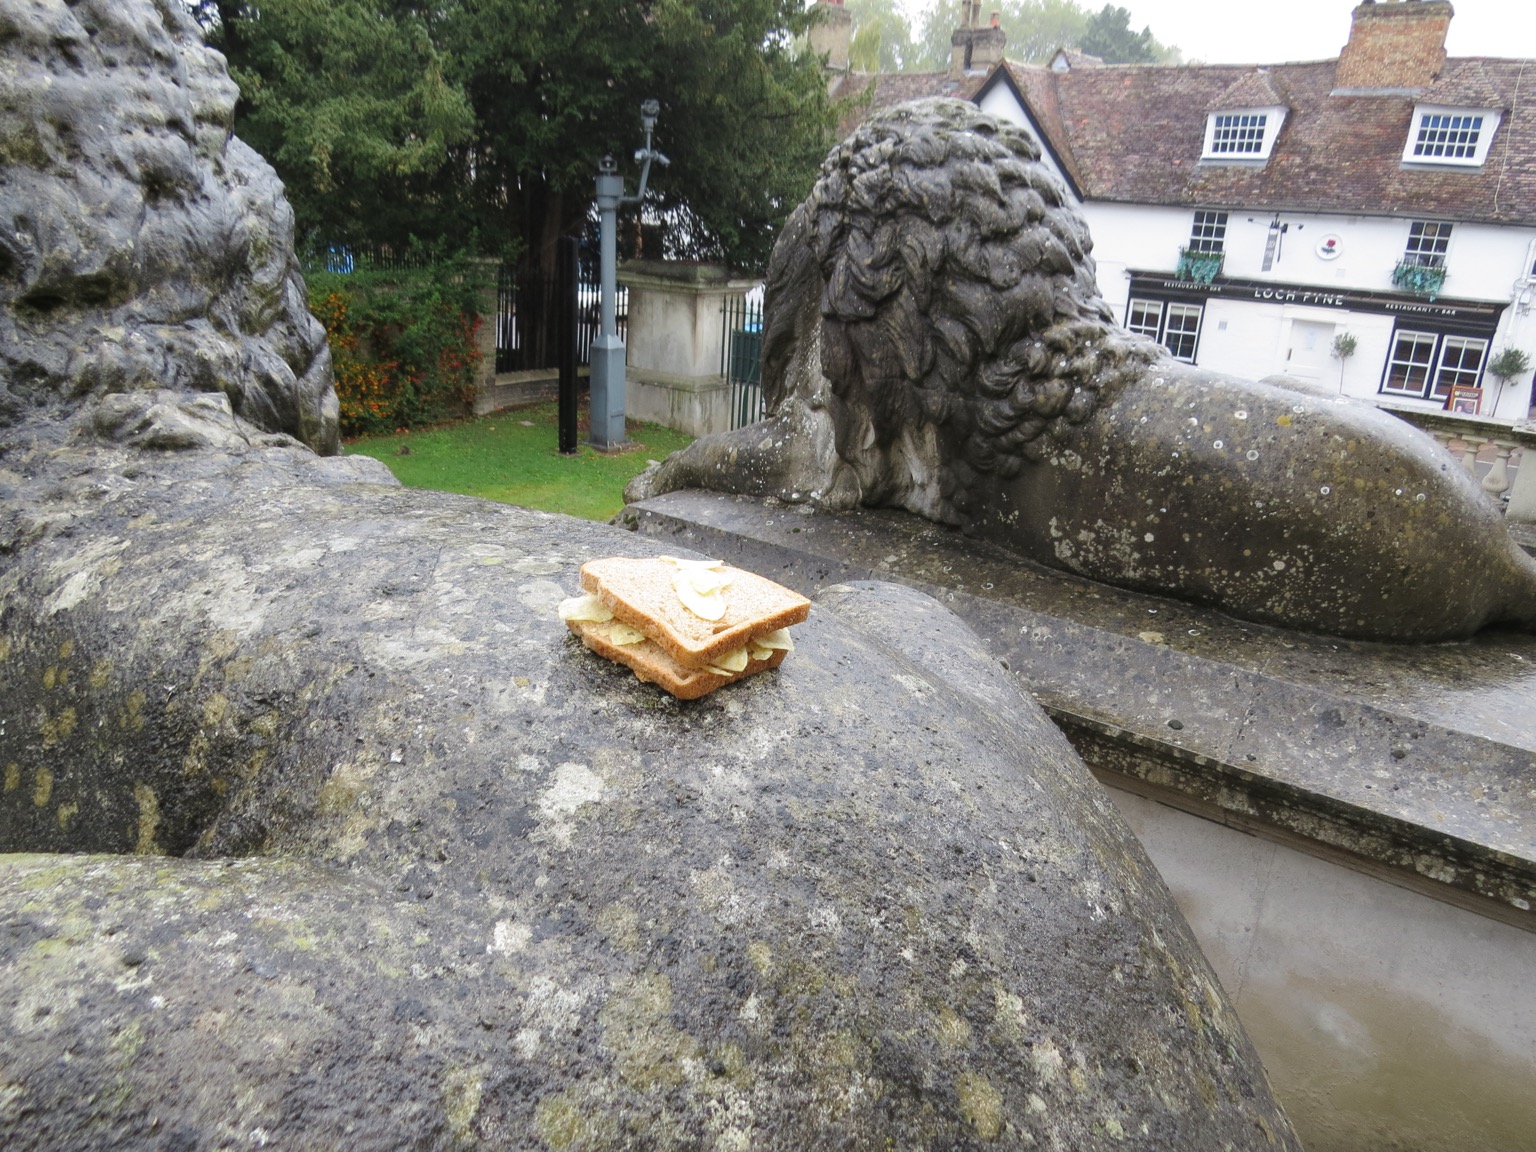 Crisp sandwich on back of lion statue with another behind